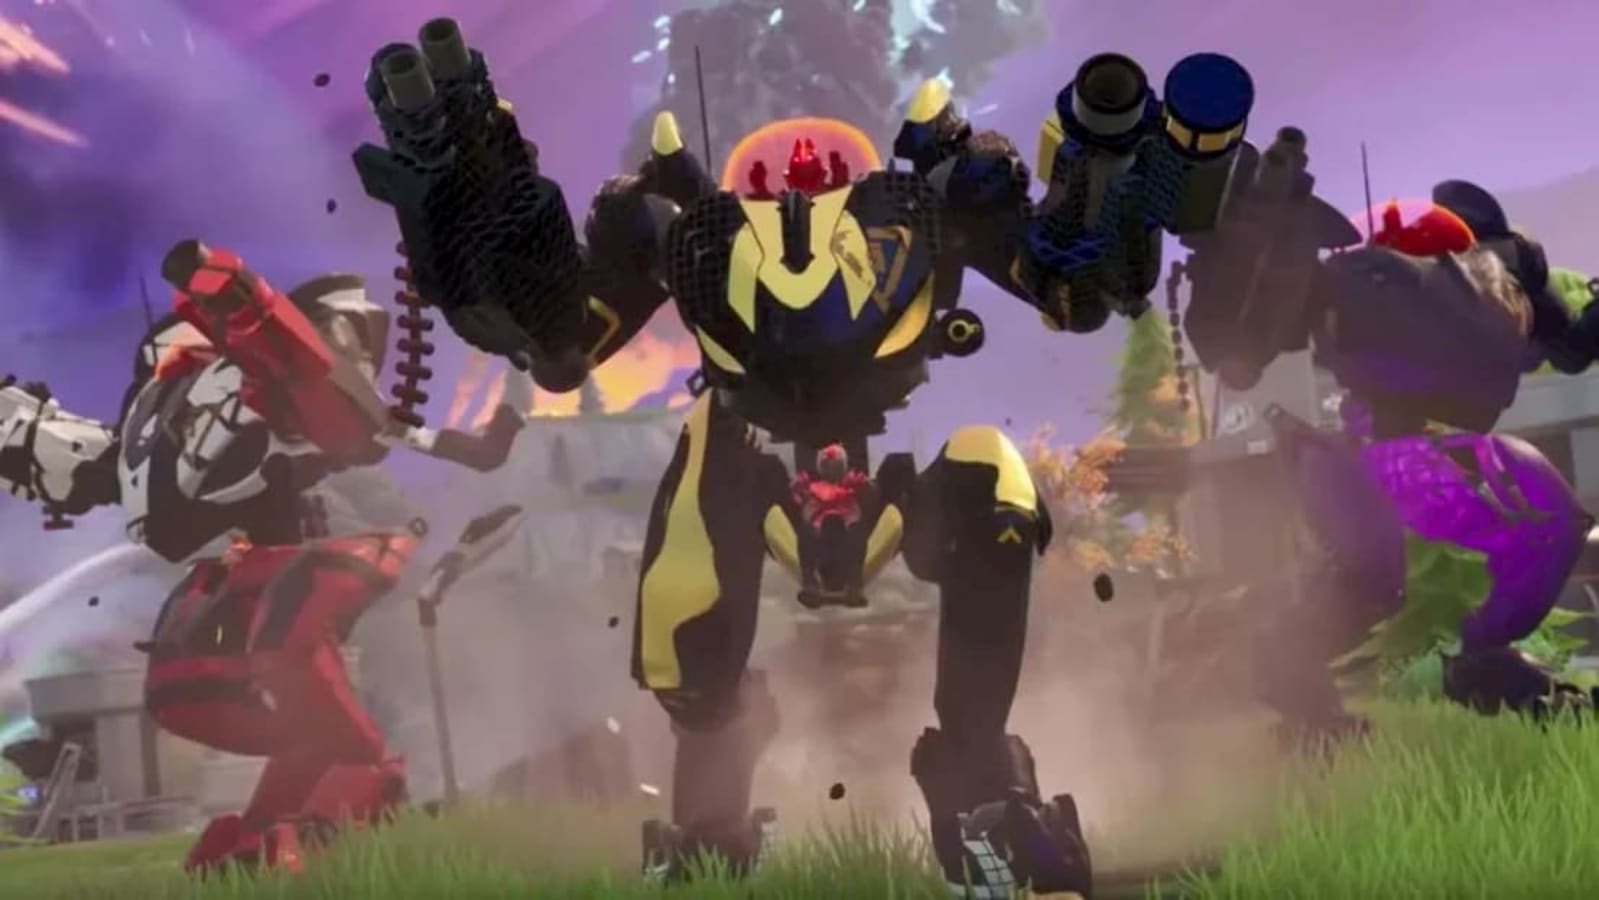 Epic Added The Hated Mechs To Fortnite So More Players Could Win